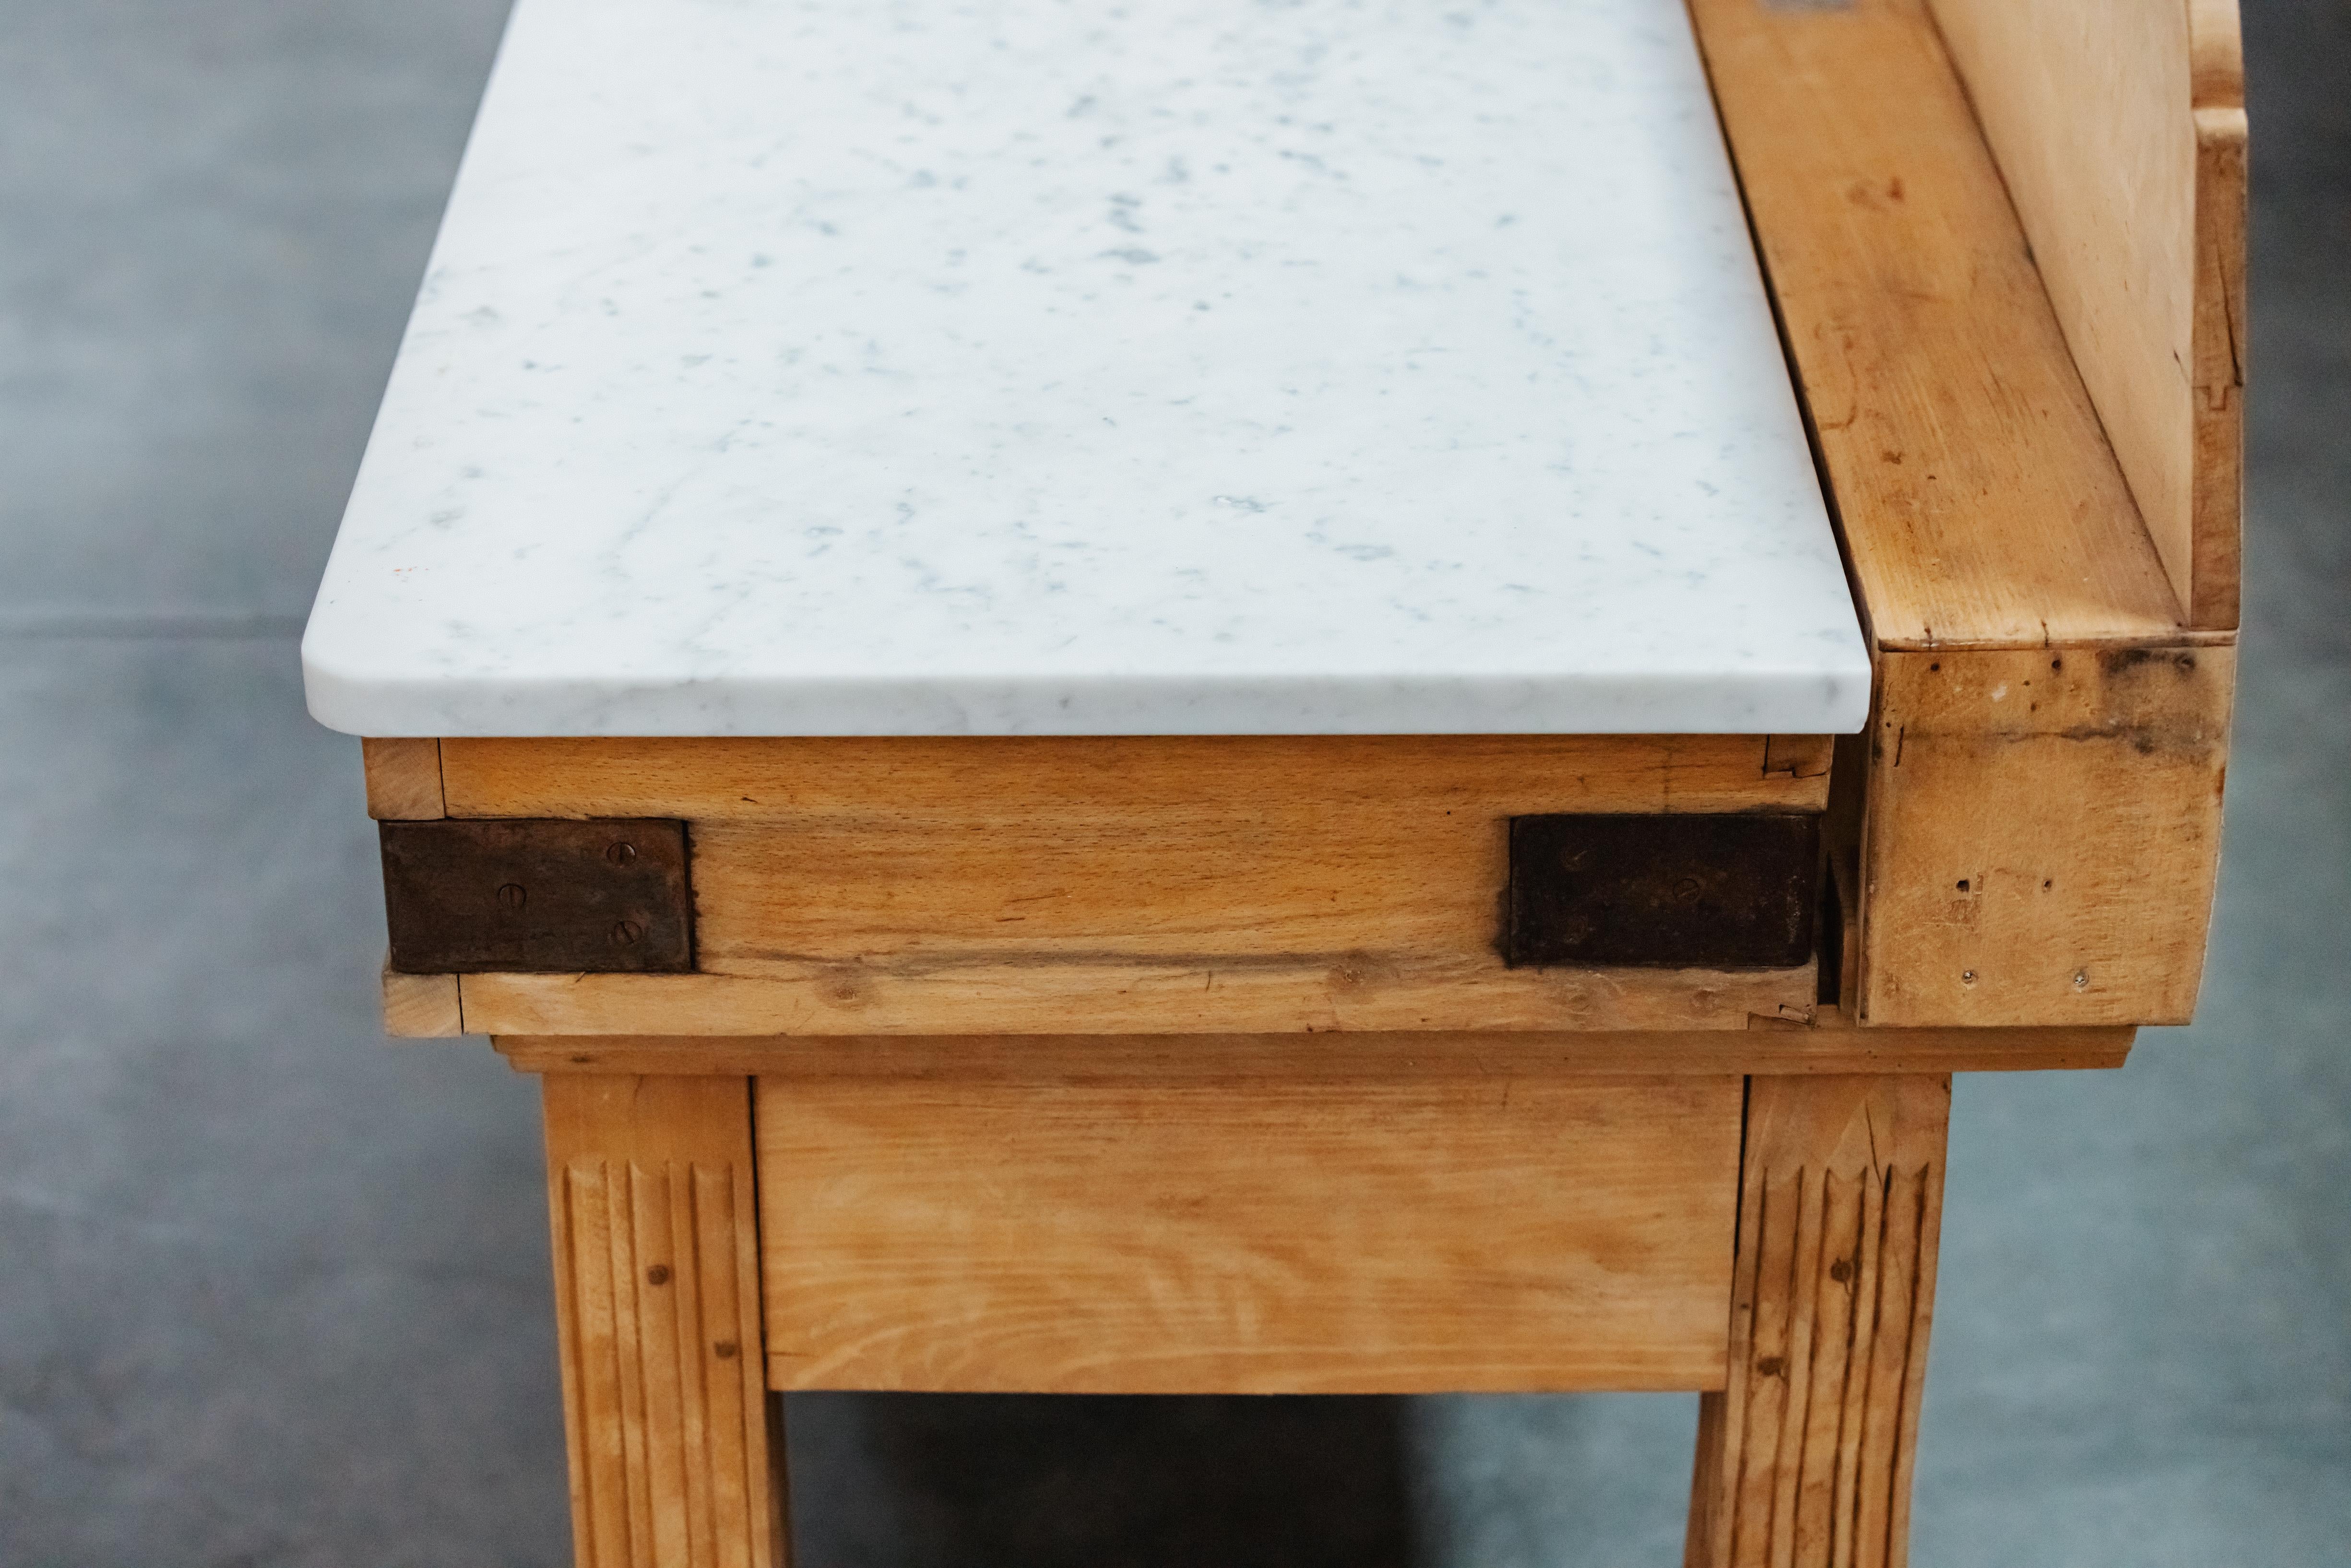 Early Marble Butcher Block Table From France, Circa 1920 In Good Condition For Sale In Nashville, TN